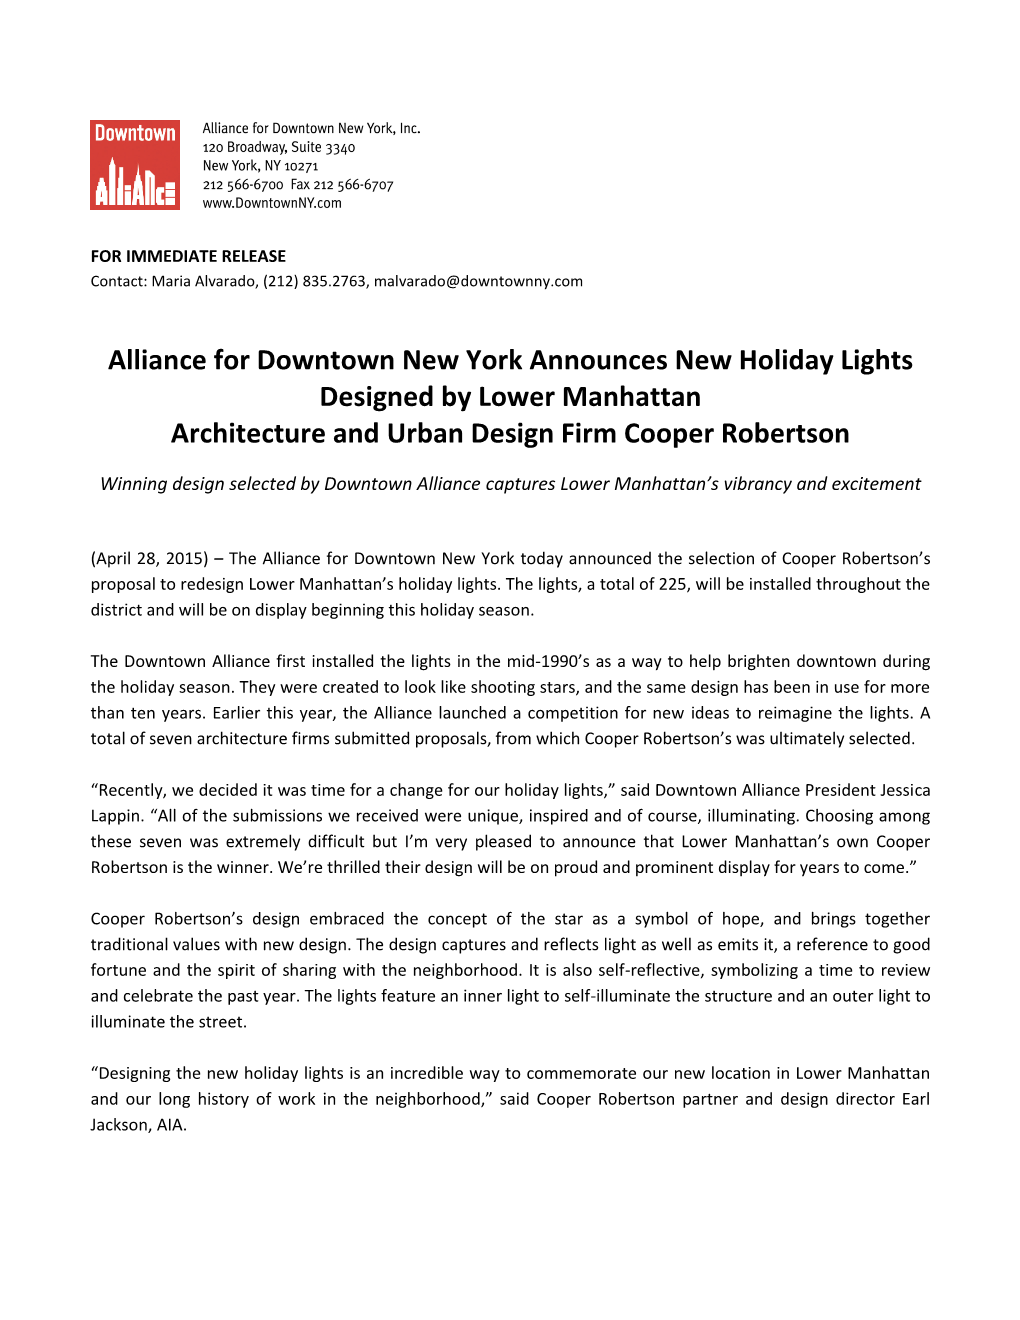 Alliance for Downtown New York Announces New Holiday Lights Designed by Lower Manhattan Architecture and Urban Design Firm Cooper Robertson